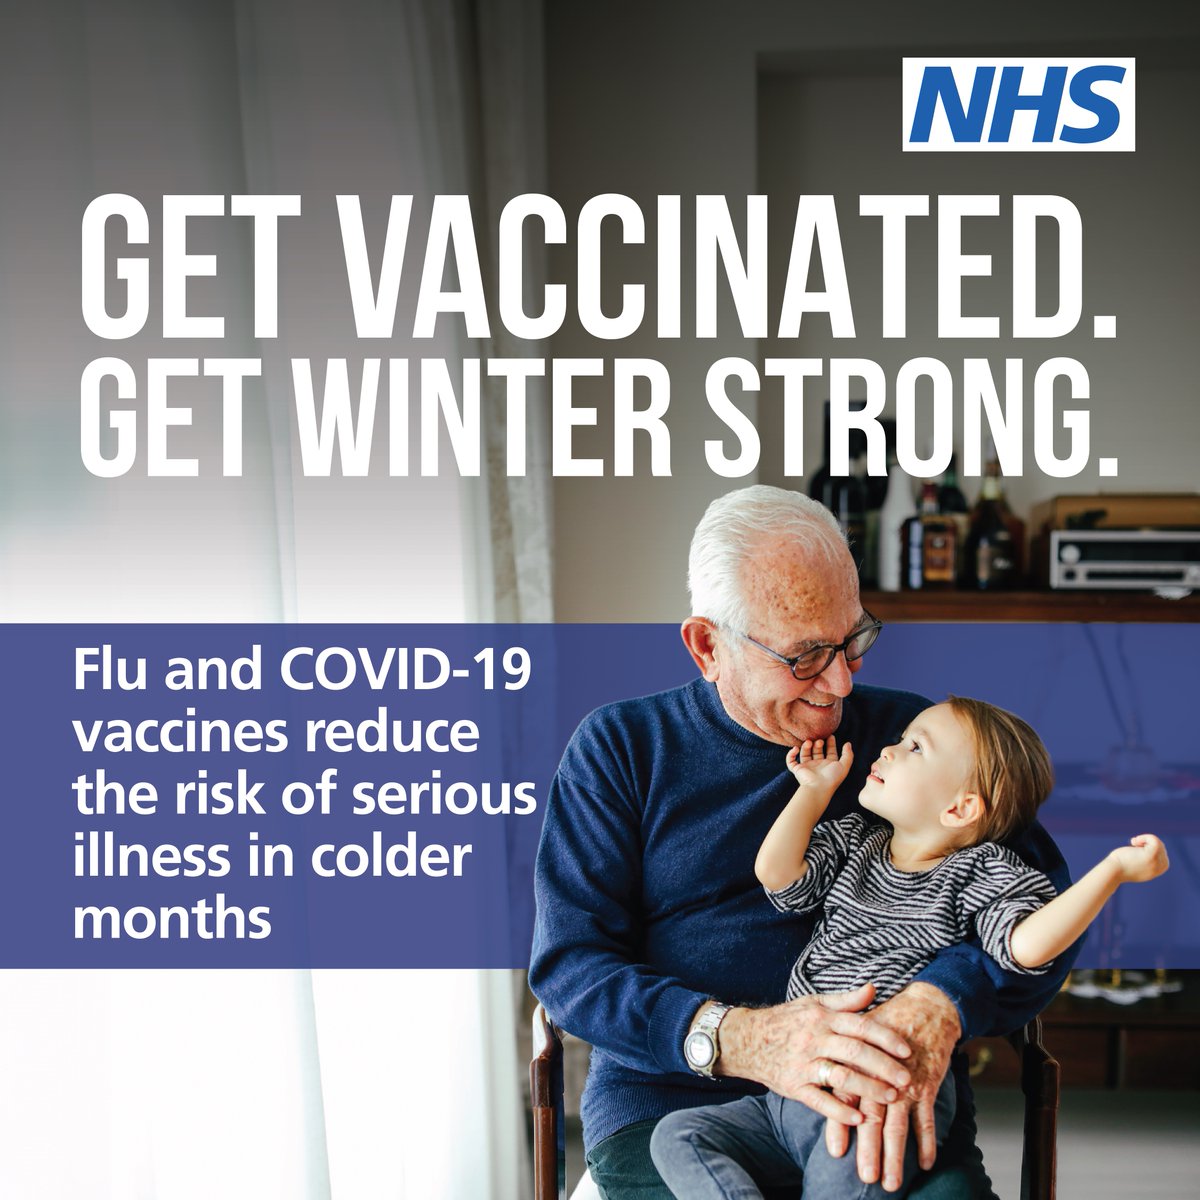 For some, flu or COVID-19 can be very dangerous and even life-threatening. Flu and COVID-19 vaccines reduce the risk of serious illness in colder months. Find out if you’re eligible and book now. ➡️ nhs.uk/seasonalvaccin…